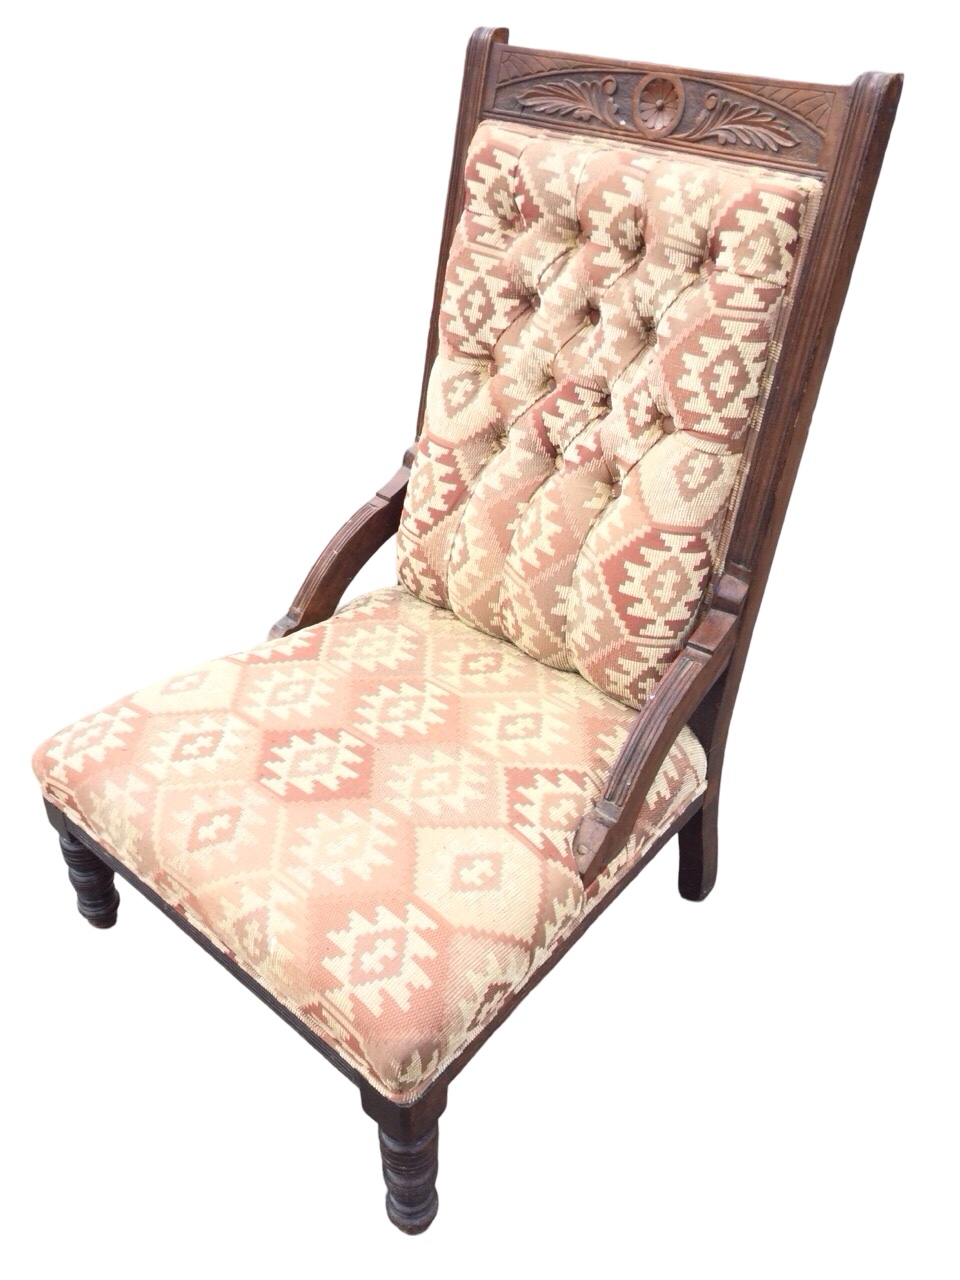 An Edwardian mahogany upholstered chair with foliate carved crestrail and rectangular buttoned